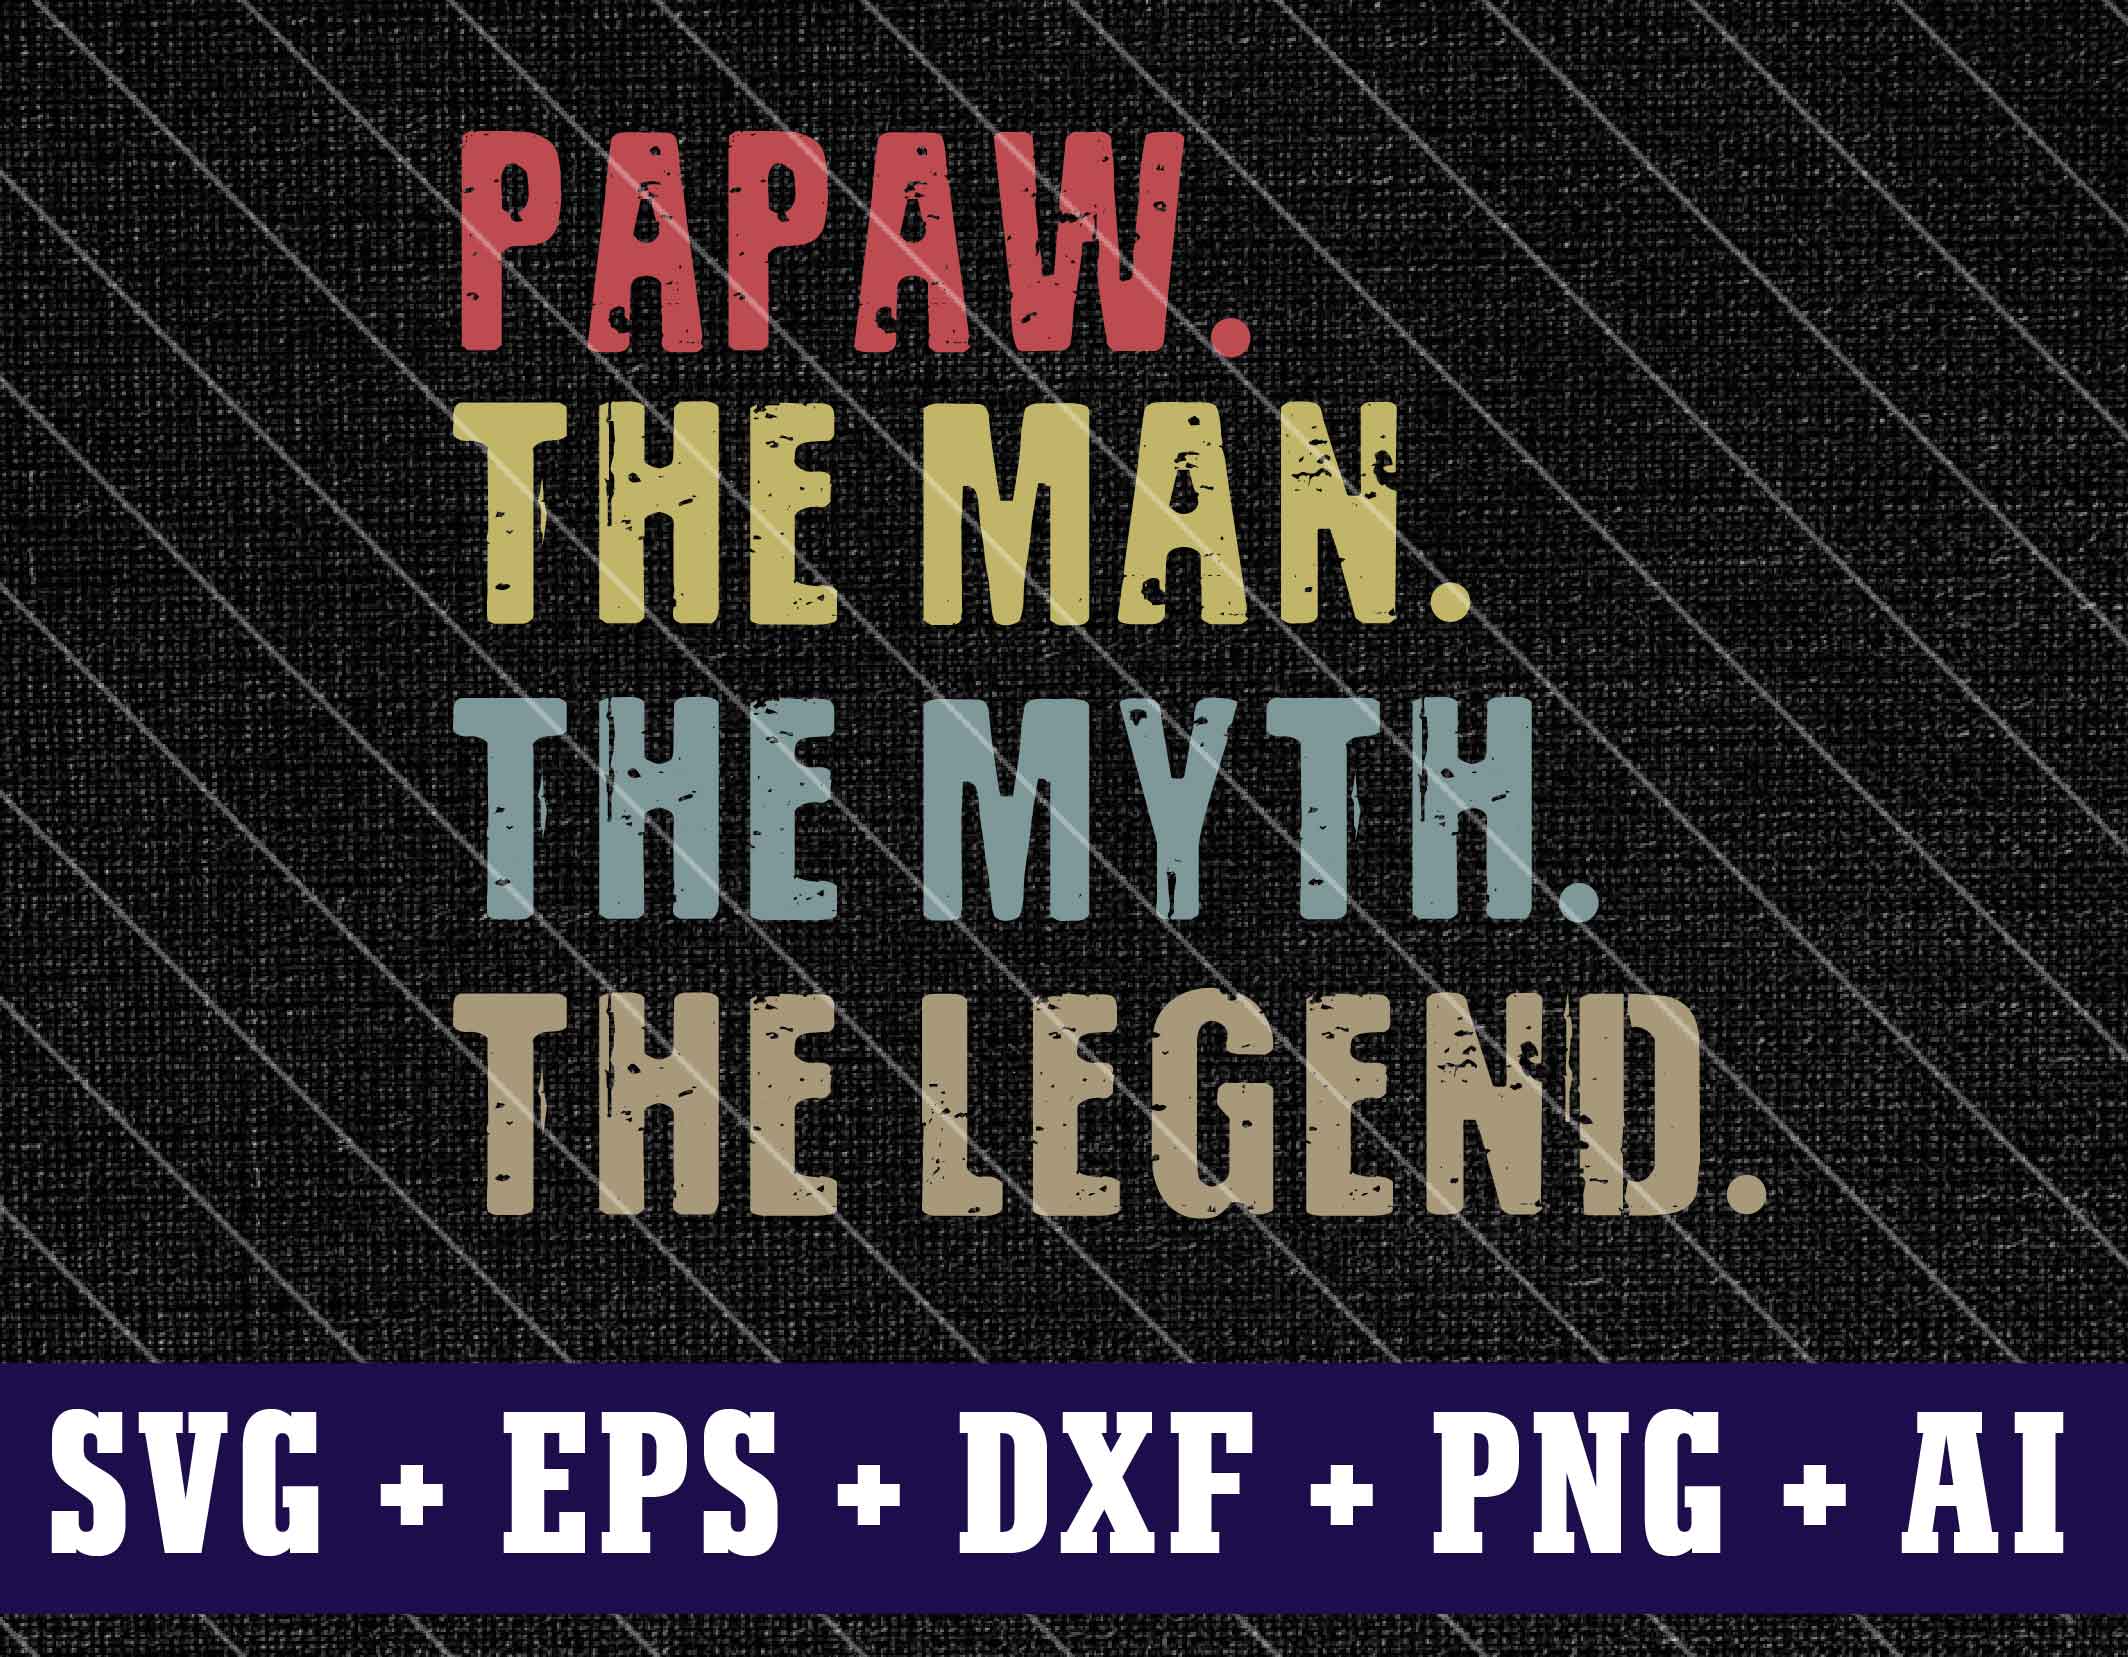 Download Daddy Svg Papaw The Man The Myth The Legend Svg Father Grandfather Distressed Vintage Vector Shirt Design Cricut Instant Download Designbtf Com